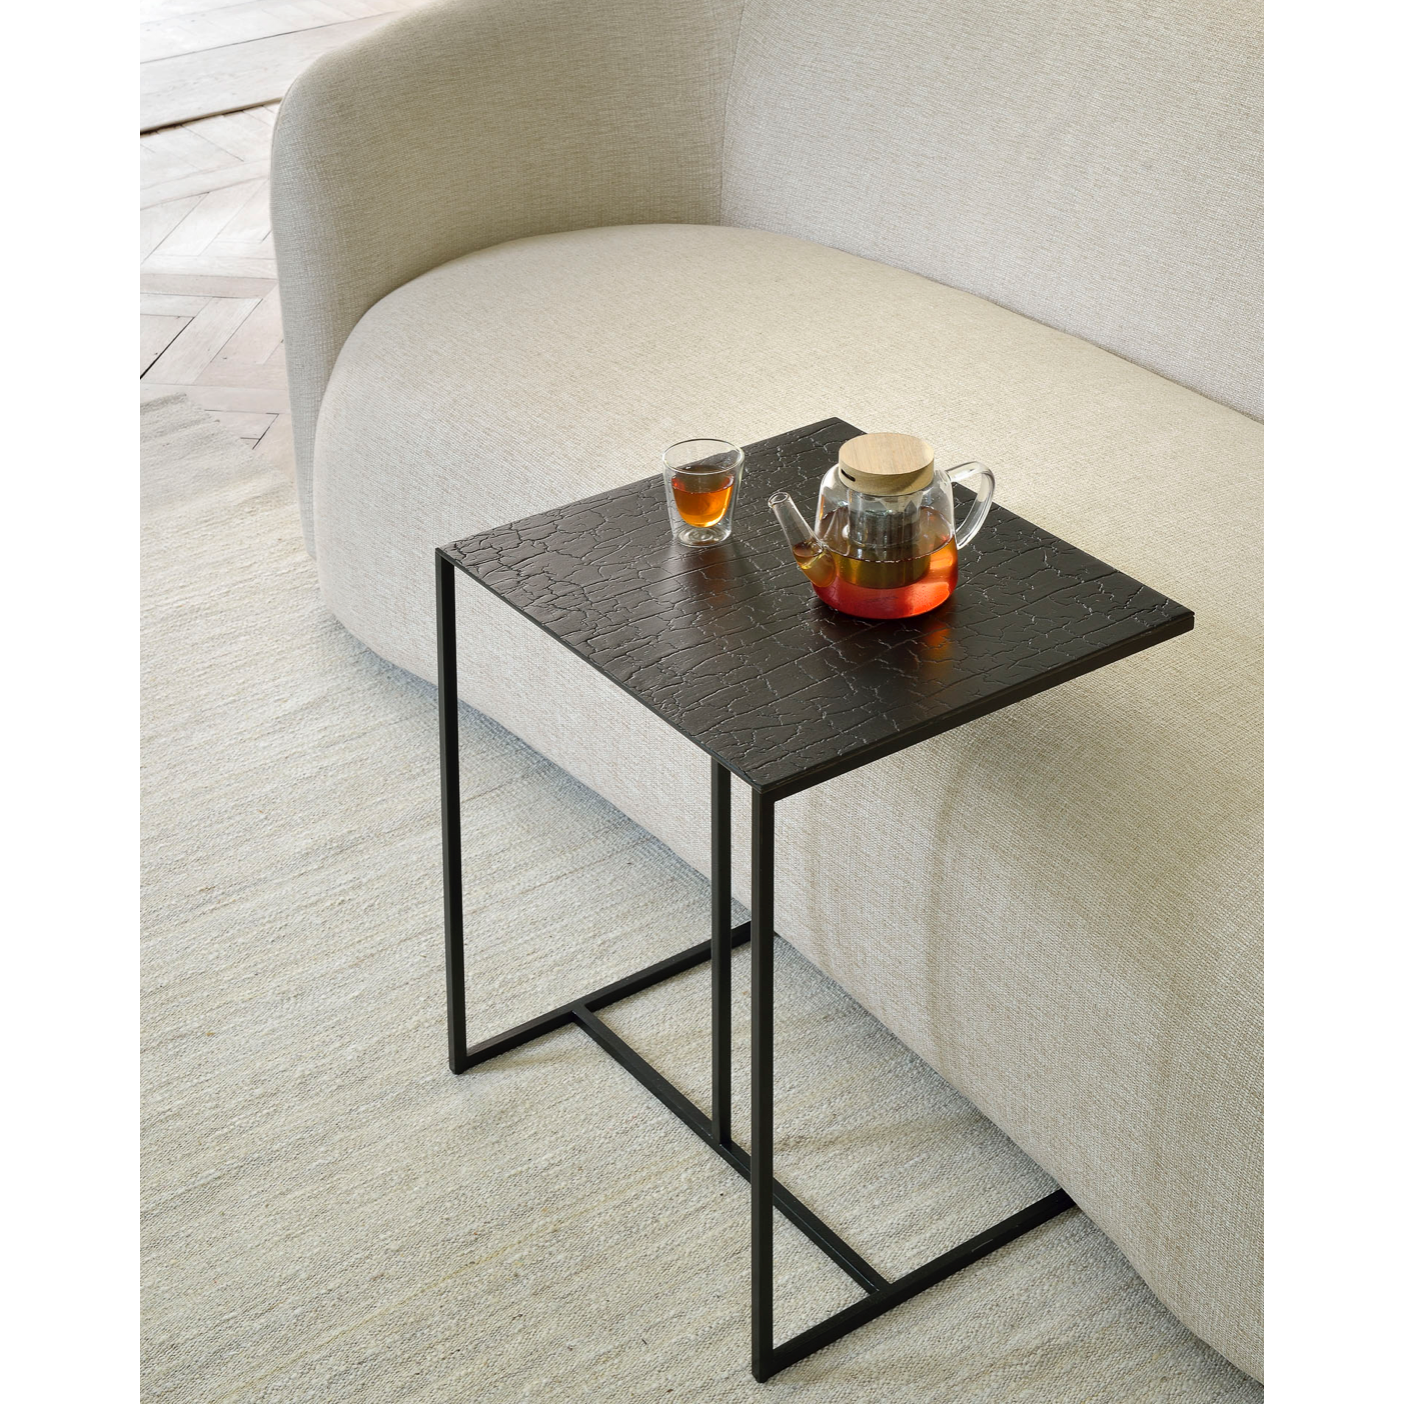 The Triptic table is a chic and practical side table that could sit perfectly with your sofa, ideal for a laptop or beverages. We love how this little table will elevate your living space aesthetically and functionally! We can't get enough of this distinctive table top finish that is made from mineral powders, water, earth, natural color pigments and metallic powders.  Dimensions: 18"w x 16"d x 20.5"h  Weight: 19 lbs  Material: Minerals  Finish: Metallic